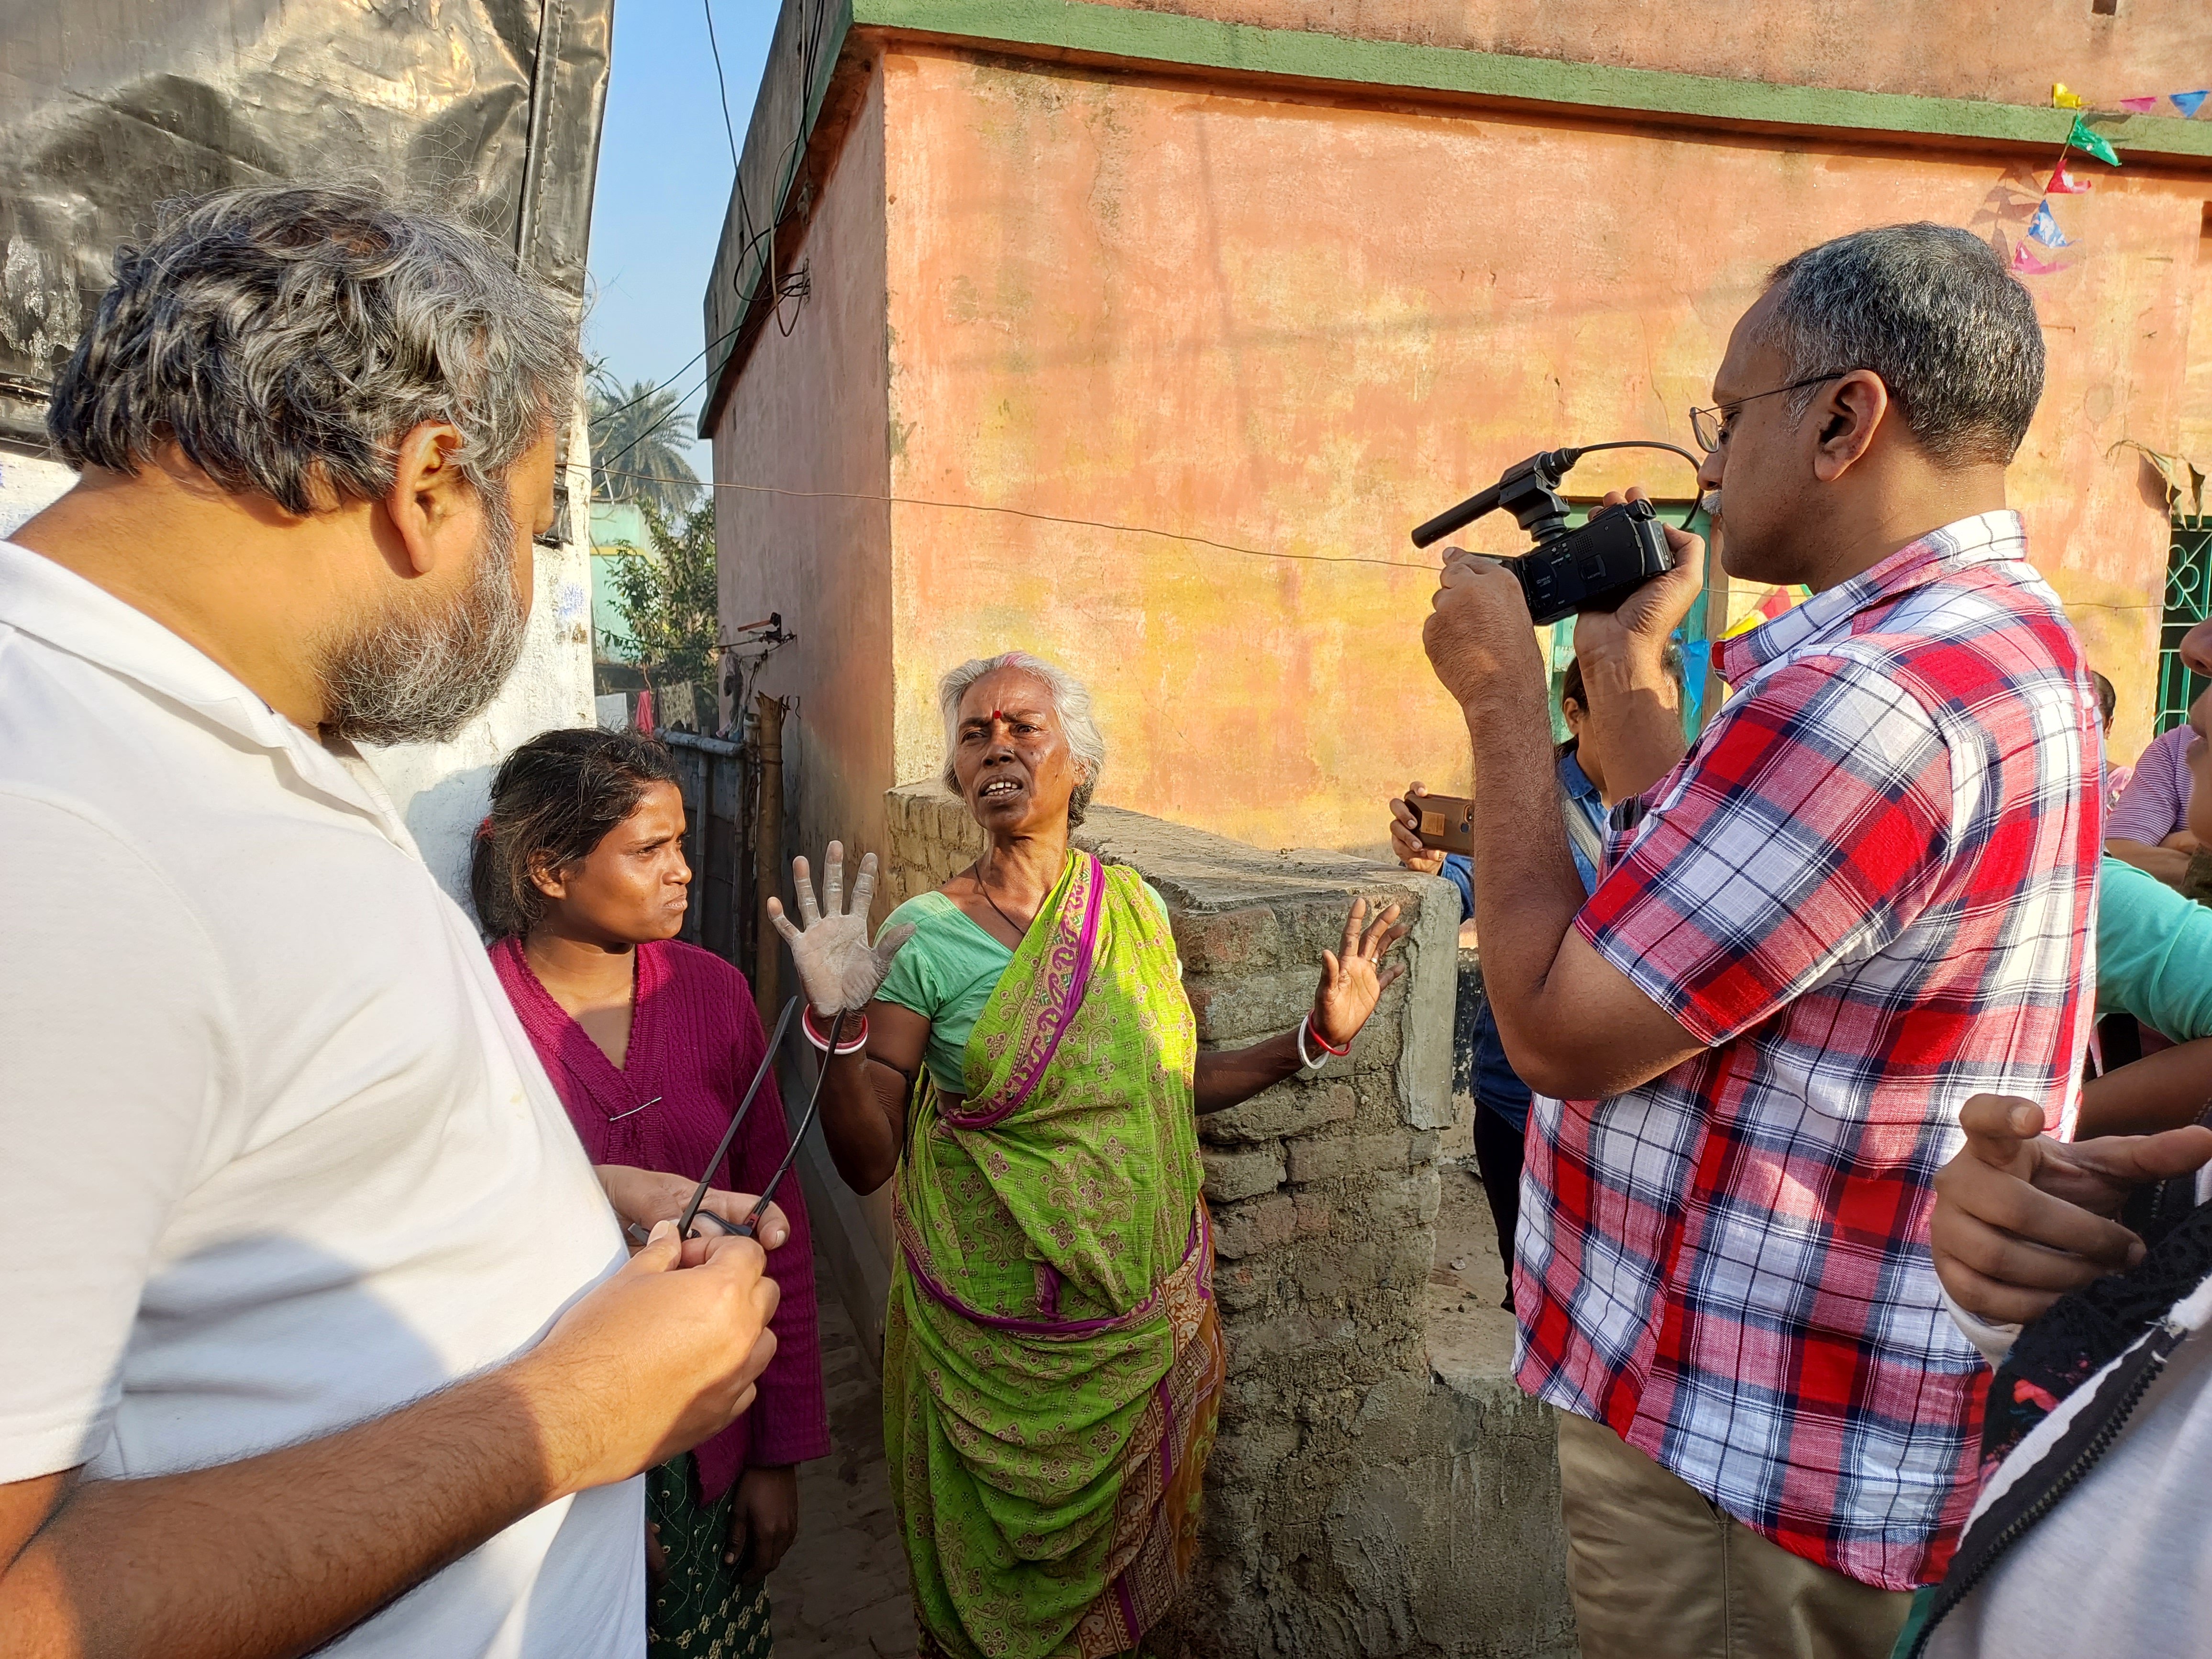 A woman gestures as a man films her